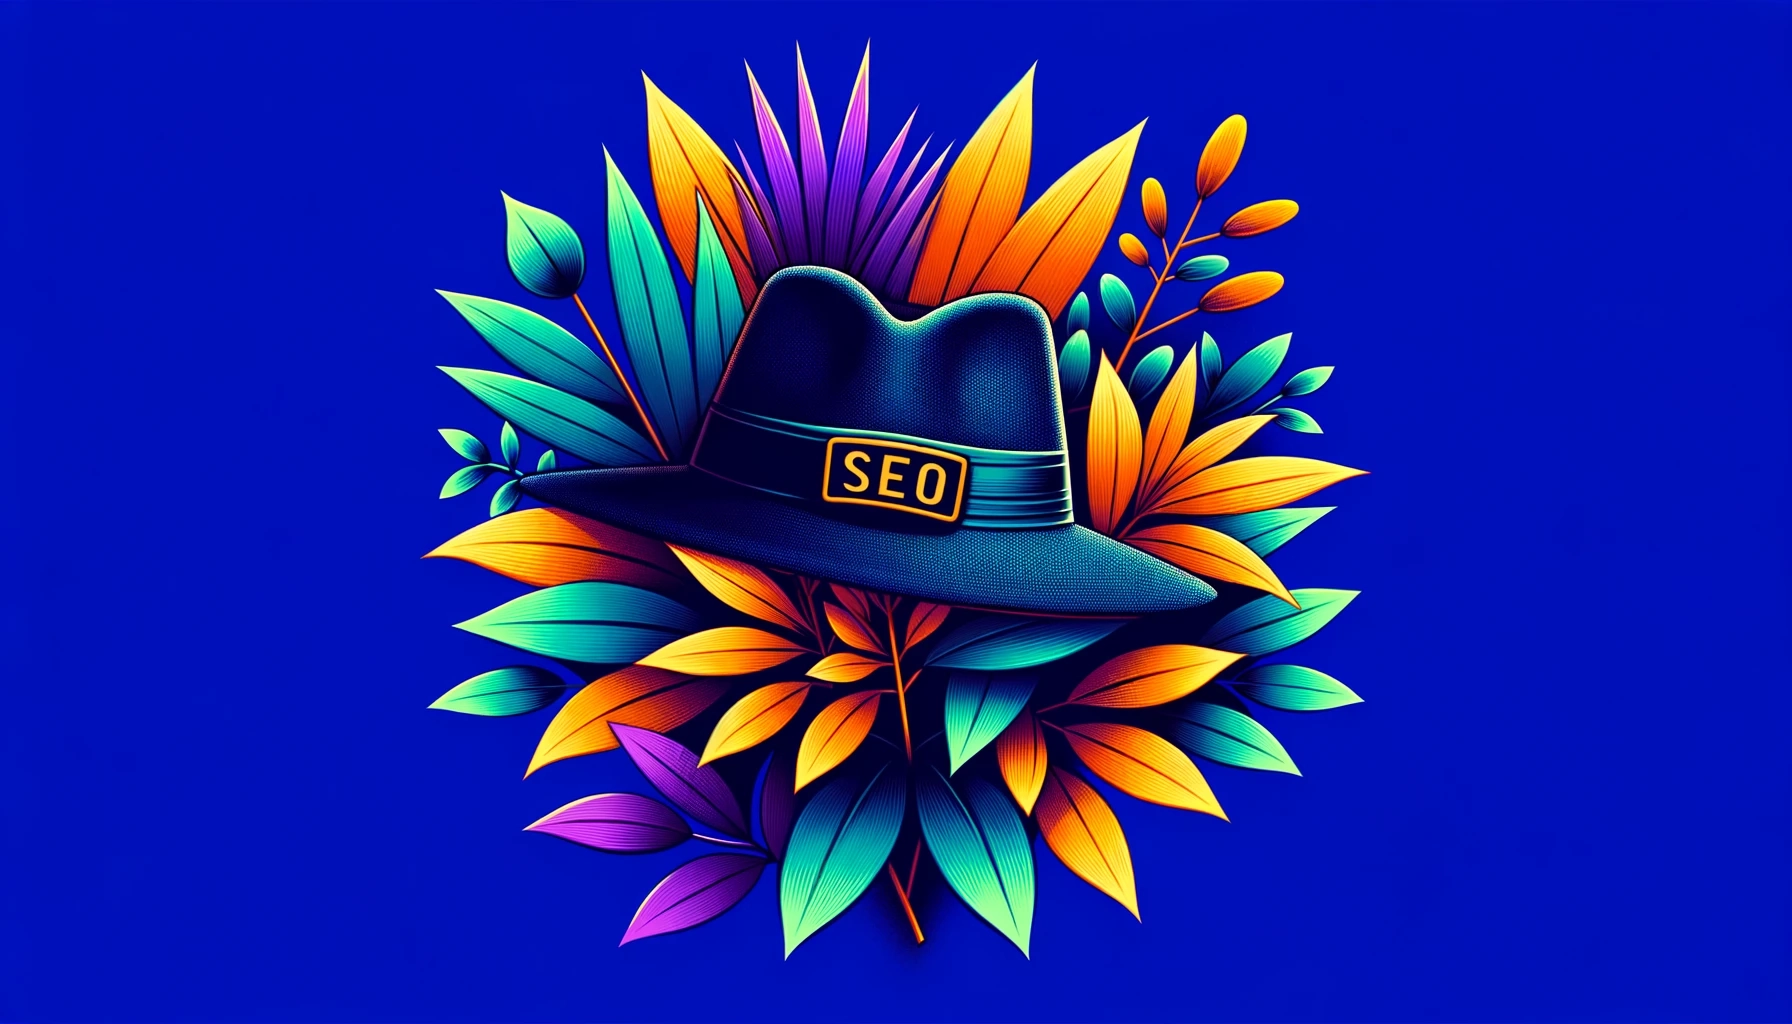 Black Hat SEO: What It Is & Harmful Techniques To Avoid